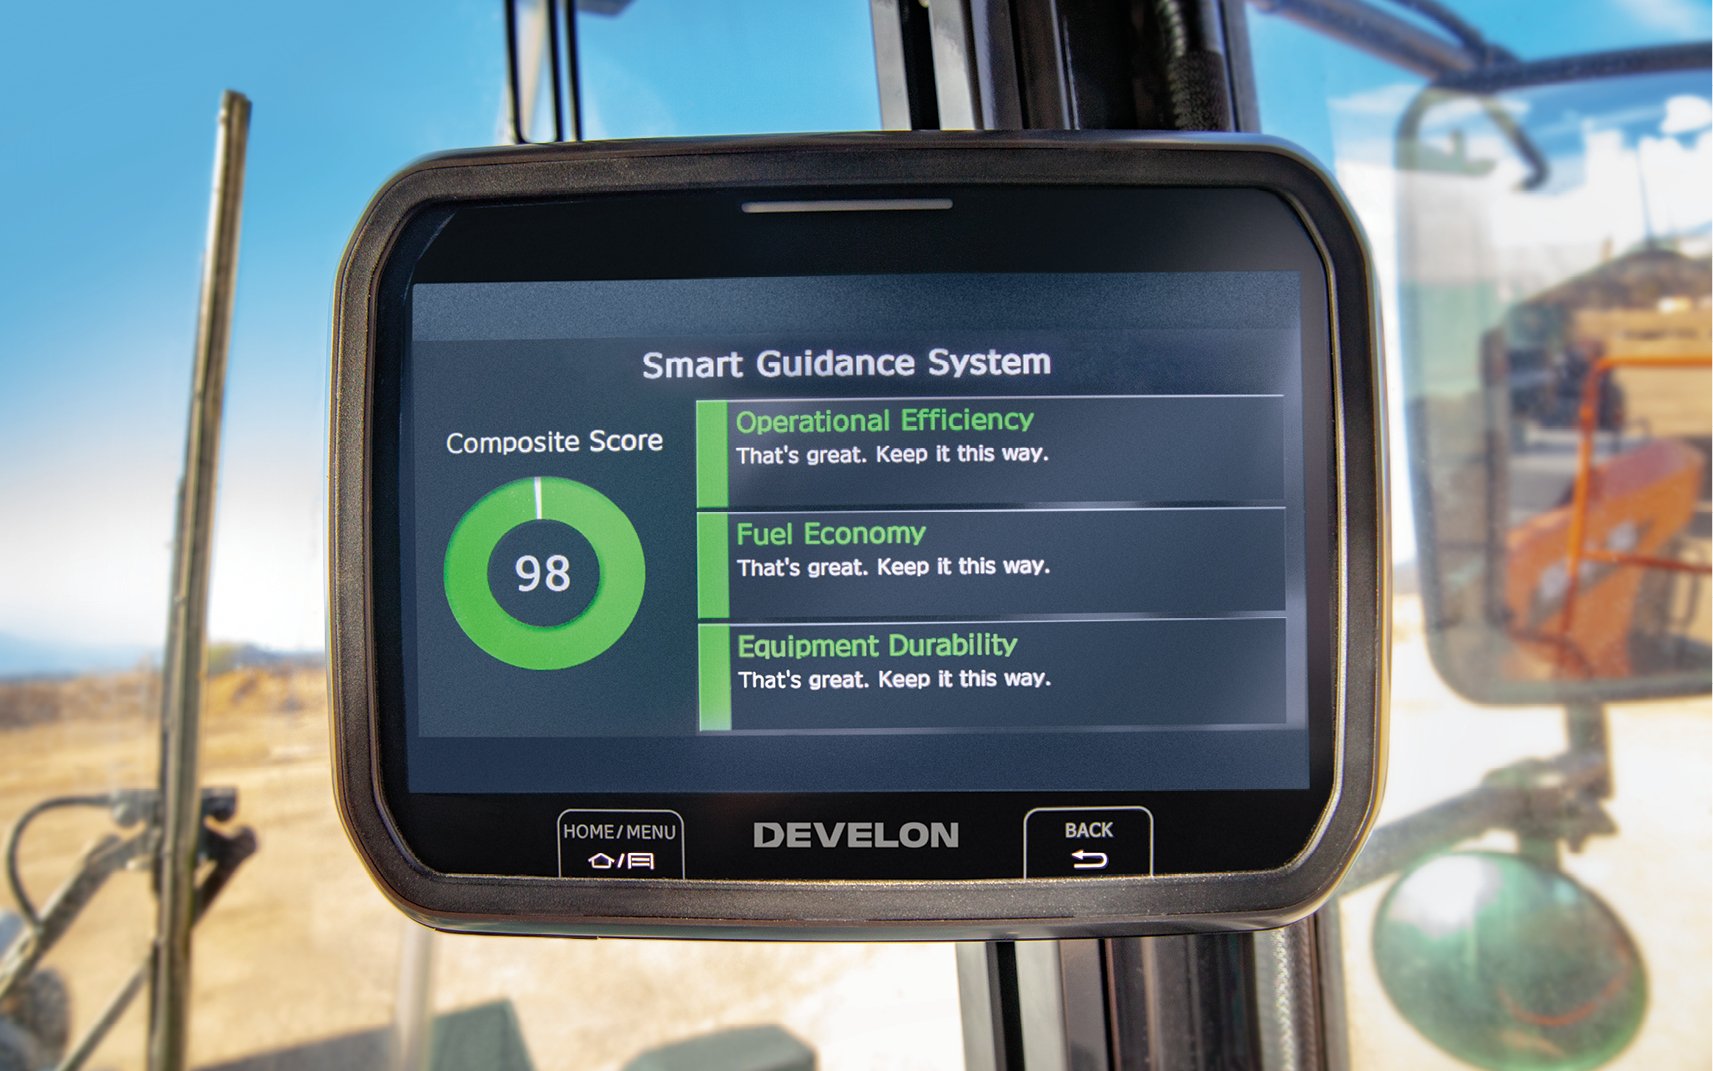 Monitor showing the new Smart Guidance System technology with Operational Efficiency, Fuel Economy and Equipment Durability.